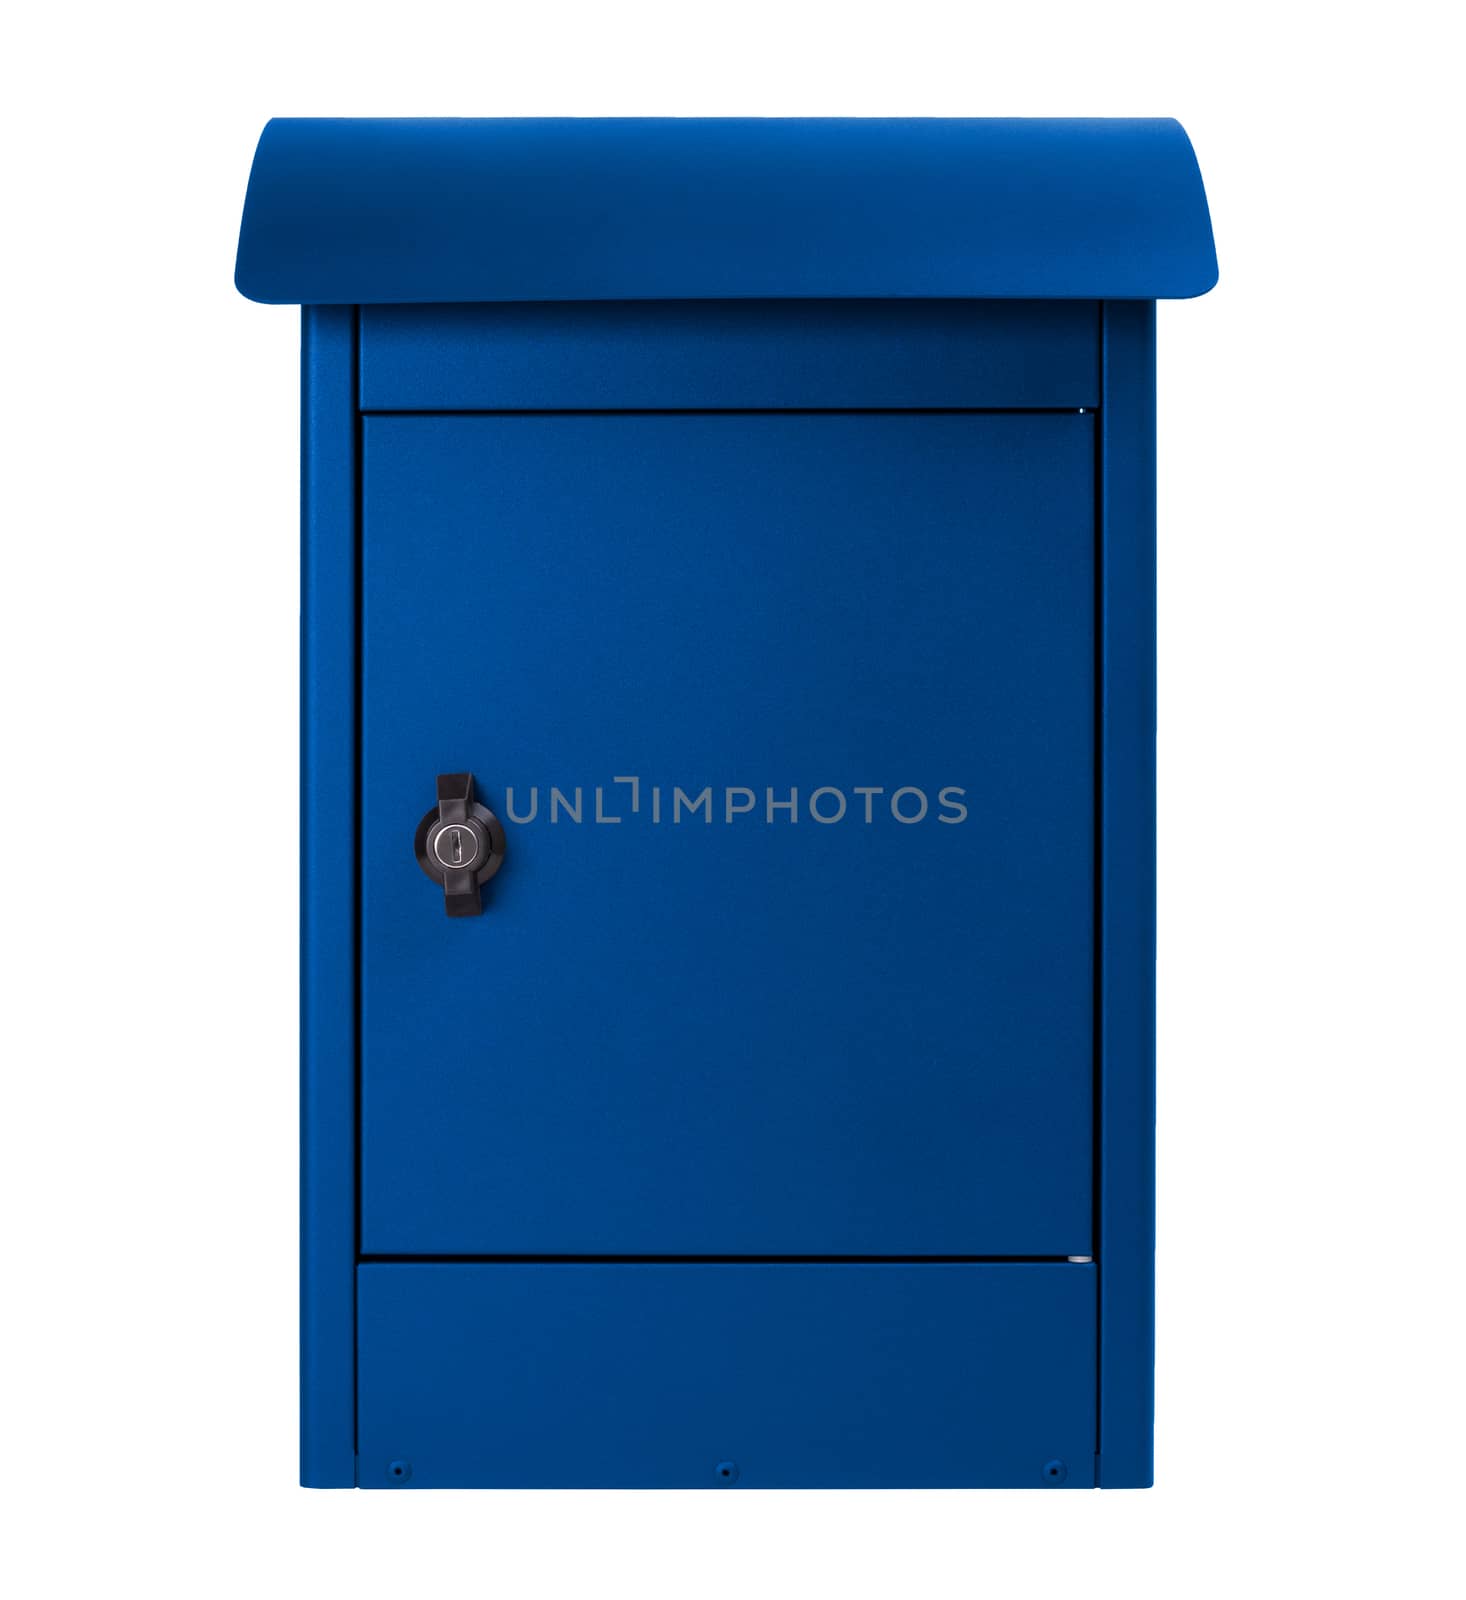 Modern letter-box isolated on a white background